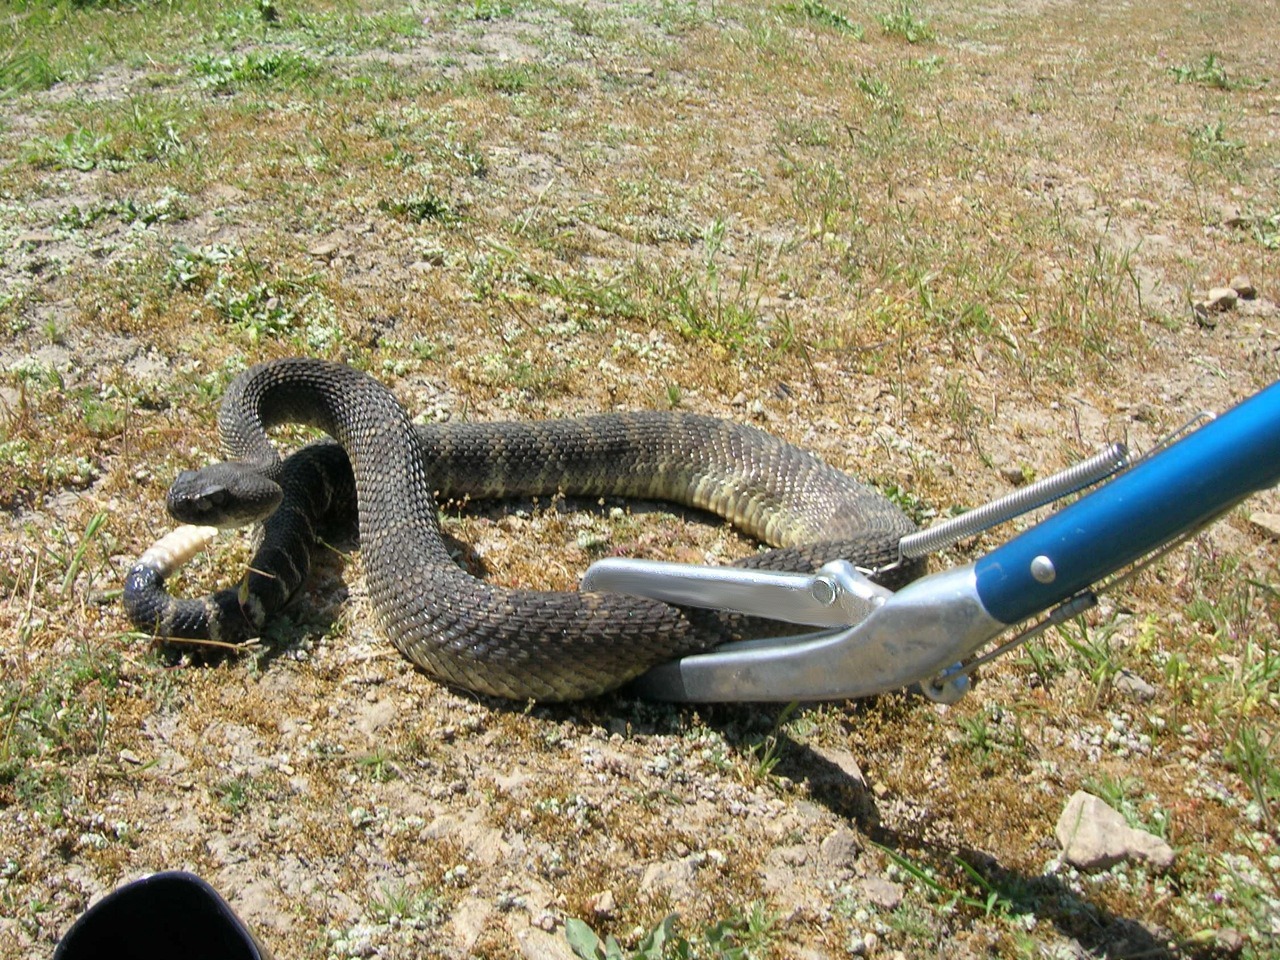 How to catch a snake with snake tongs